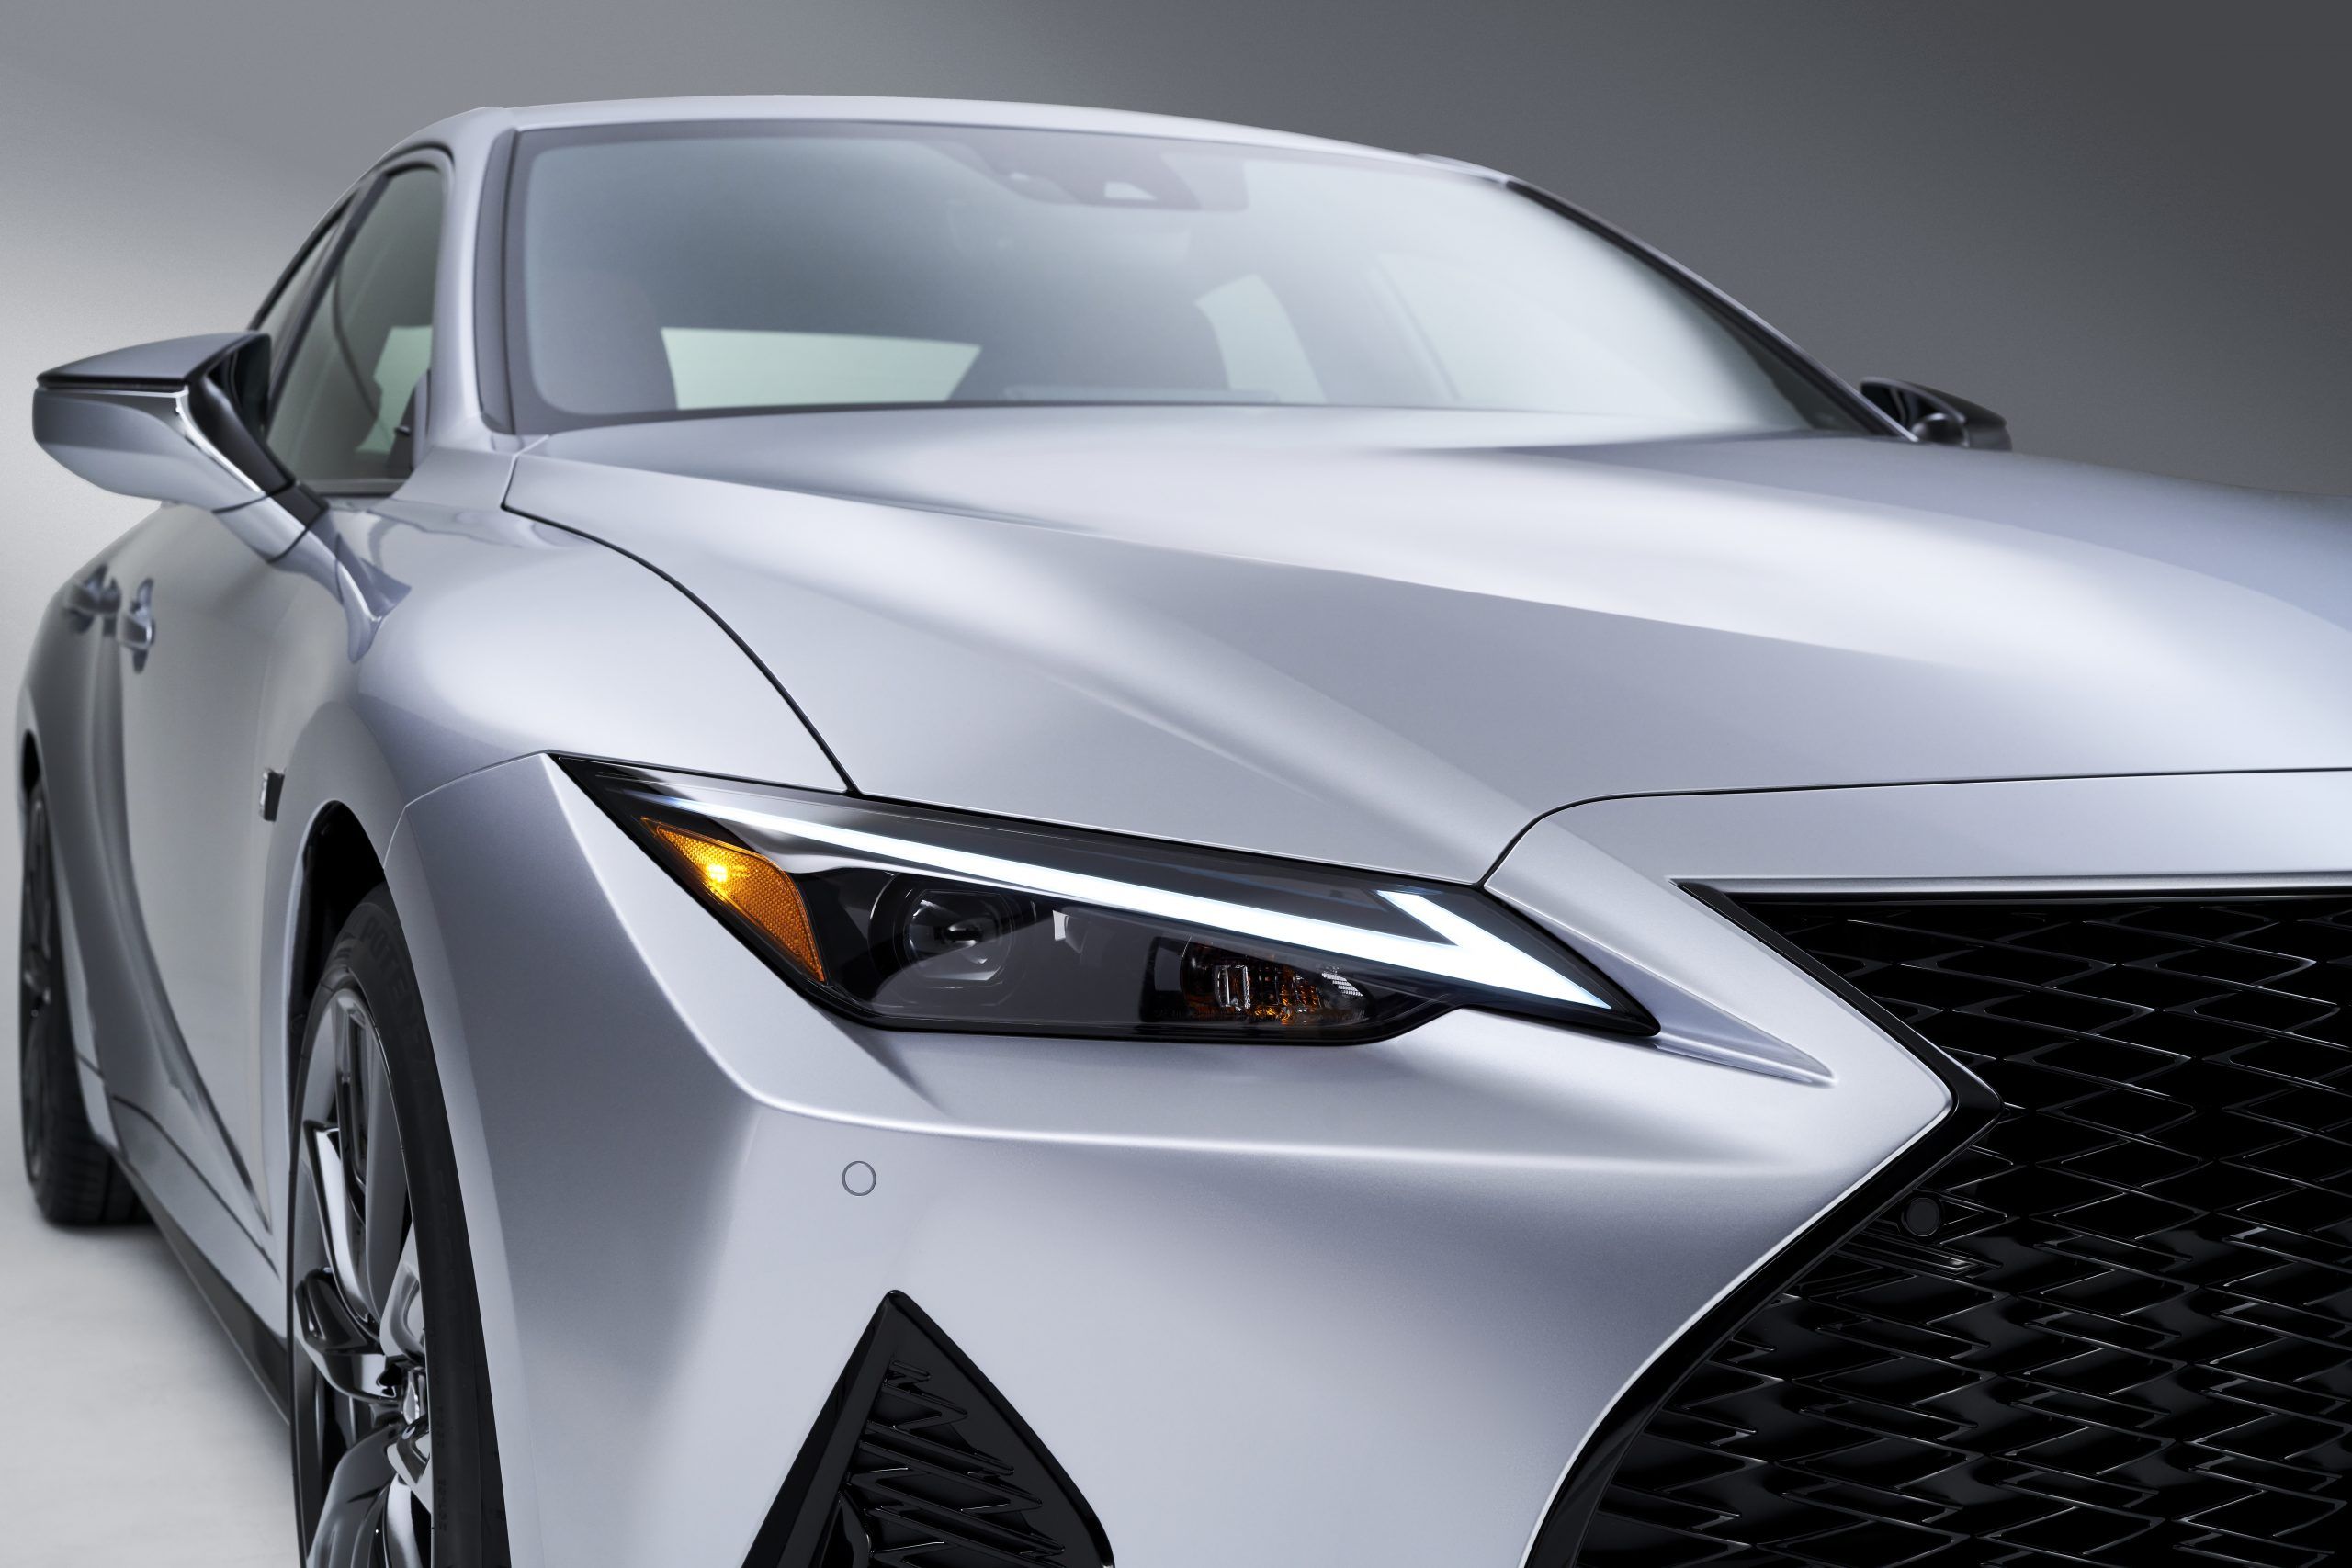 Lexus IS and Improved In Some Areas